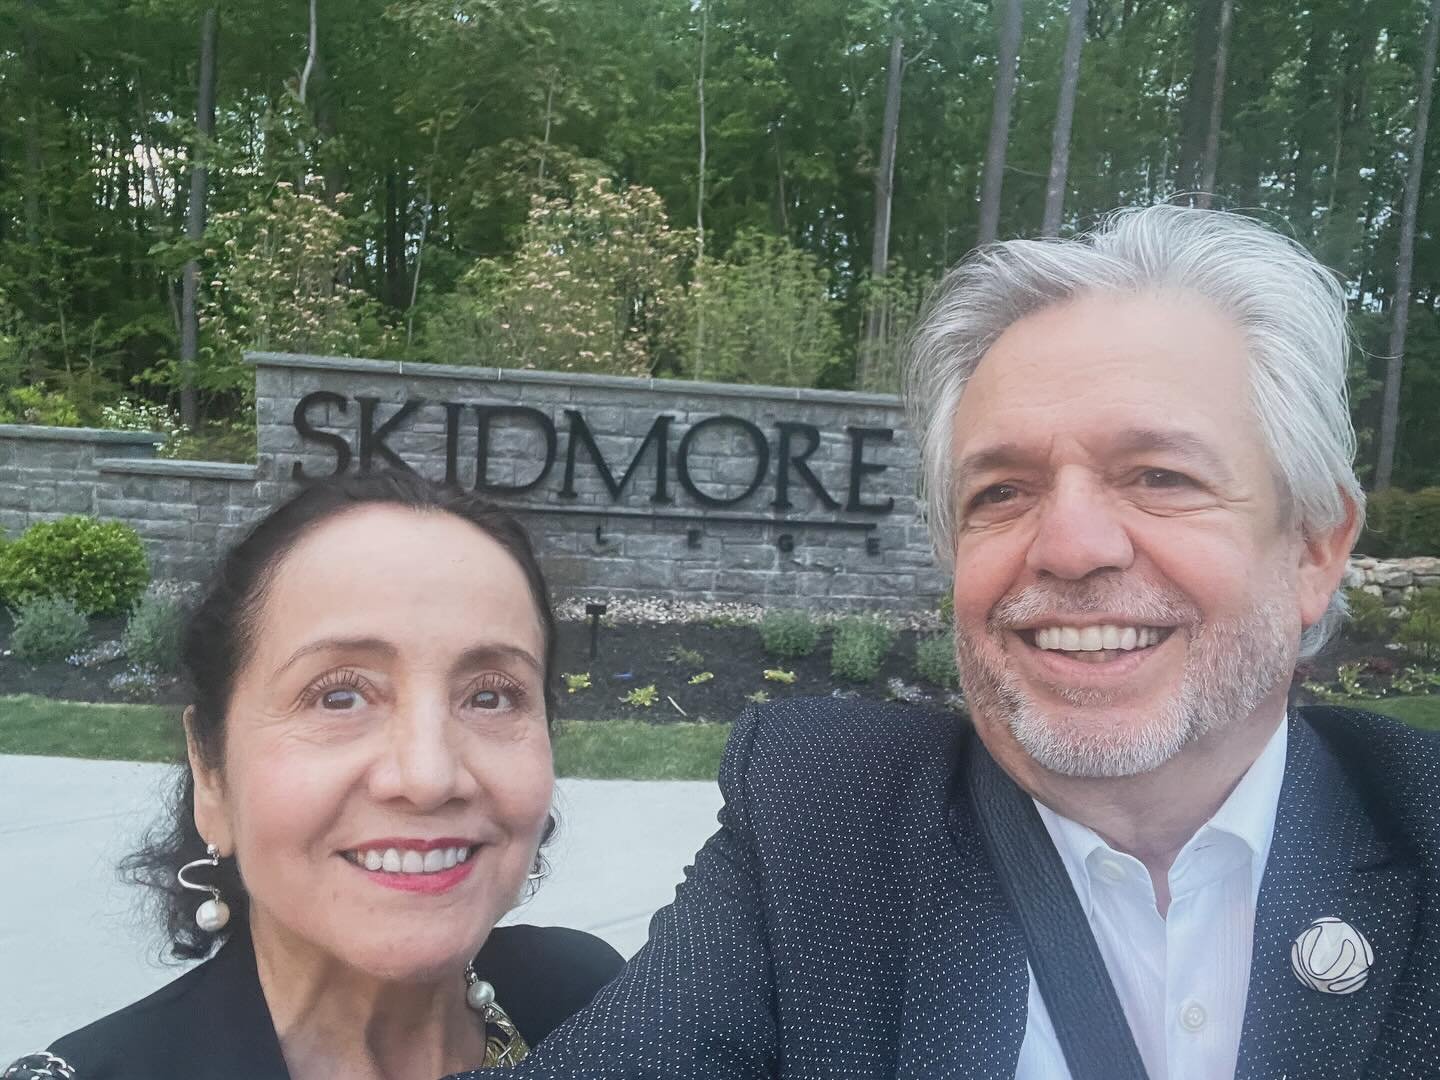 Today is the big day! Luz and I are @skidmorecollege commencement speakers. We are humbled by the opportunity to share some thoughts and experiences with 650 graduates. We will be at the same stage where our Miguel graduated last year.